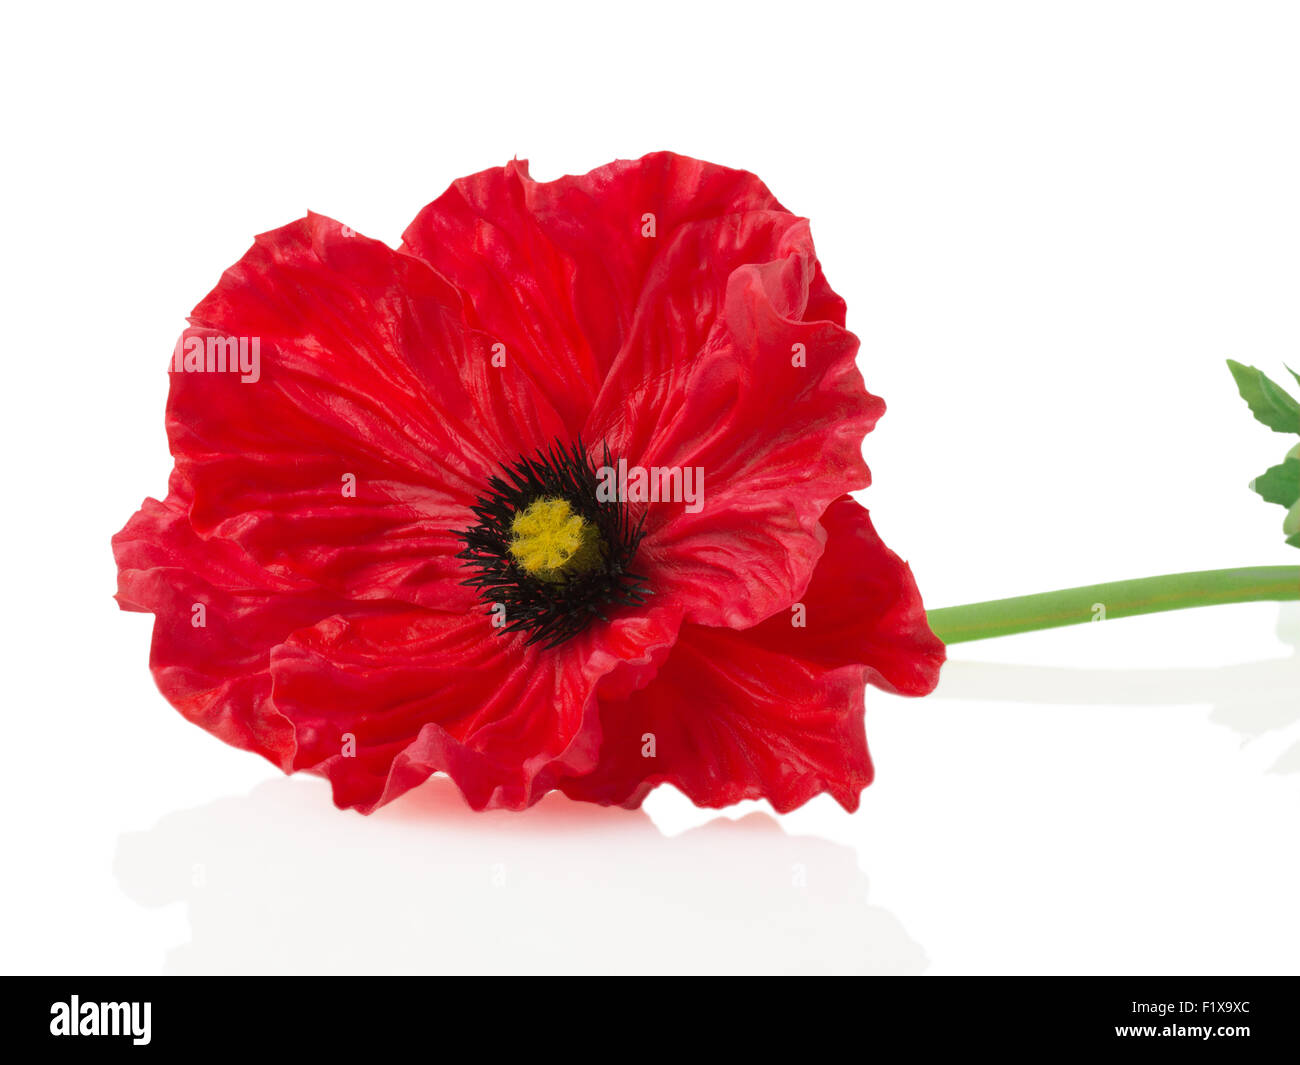 Red poppy on a white background. Stock Photo